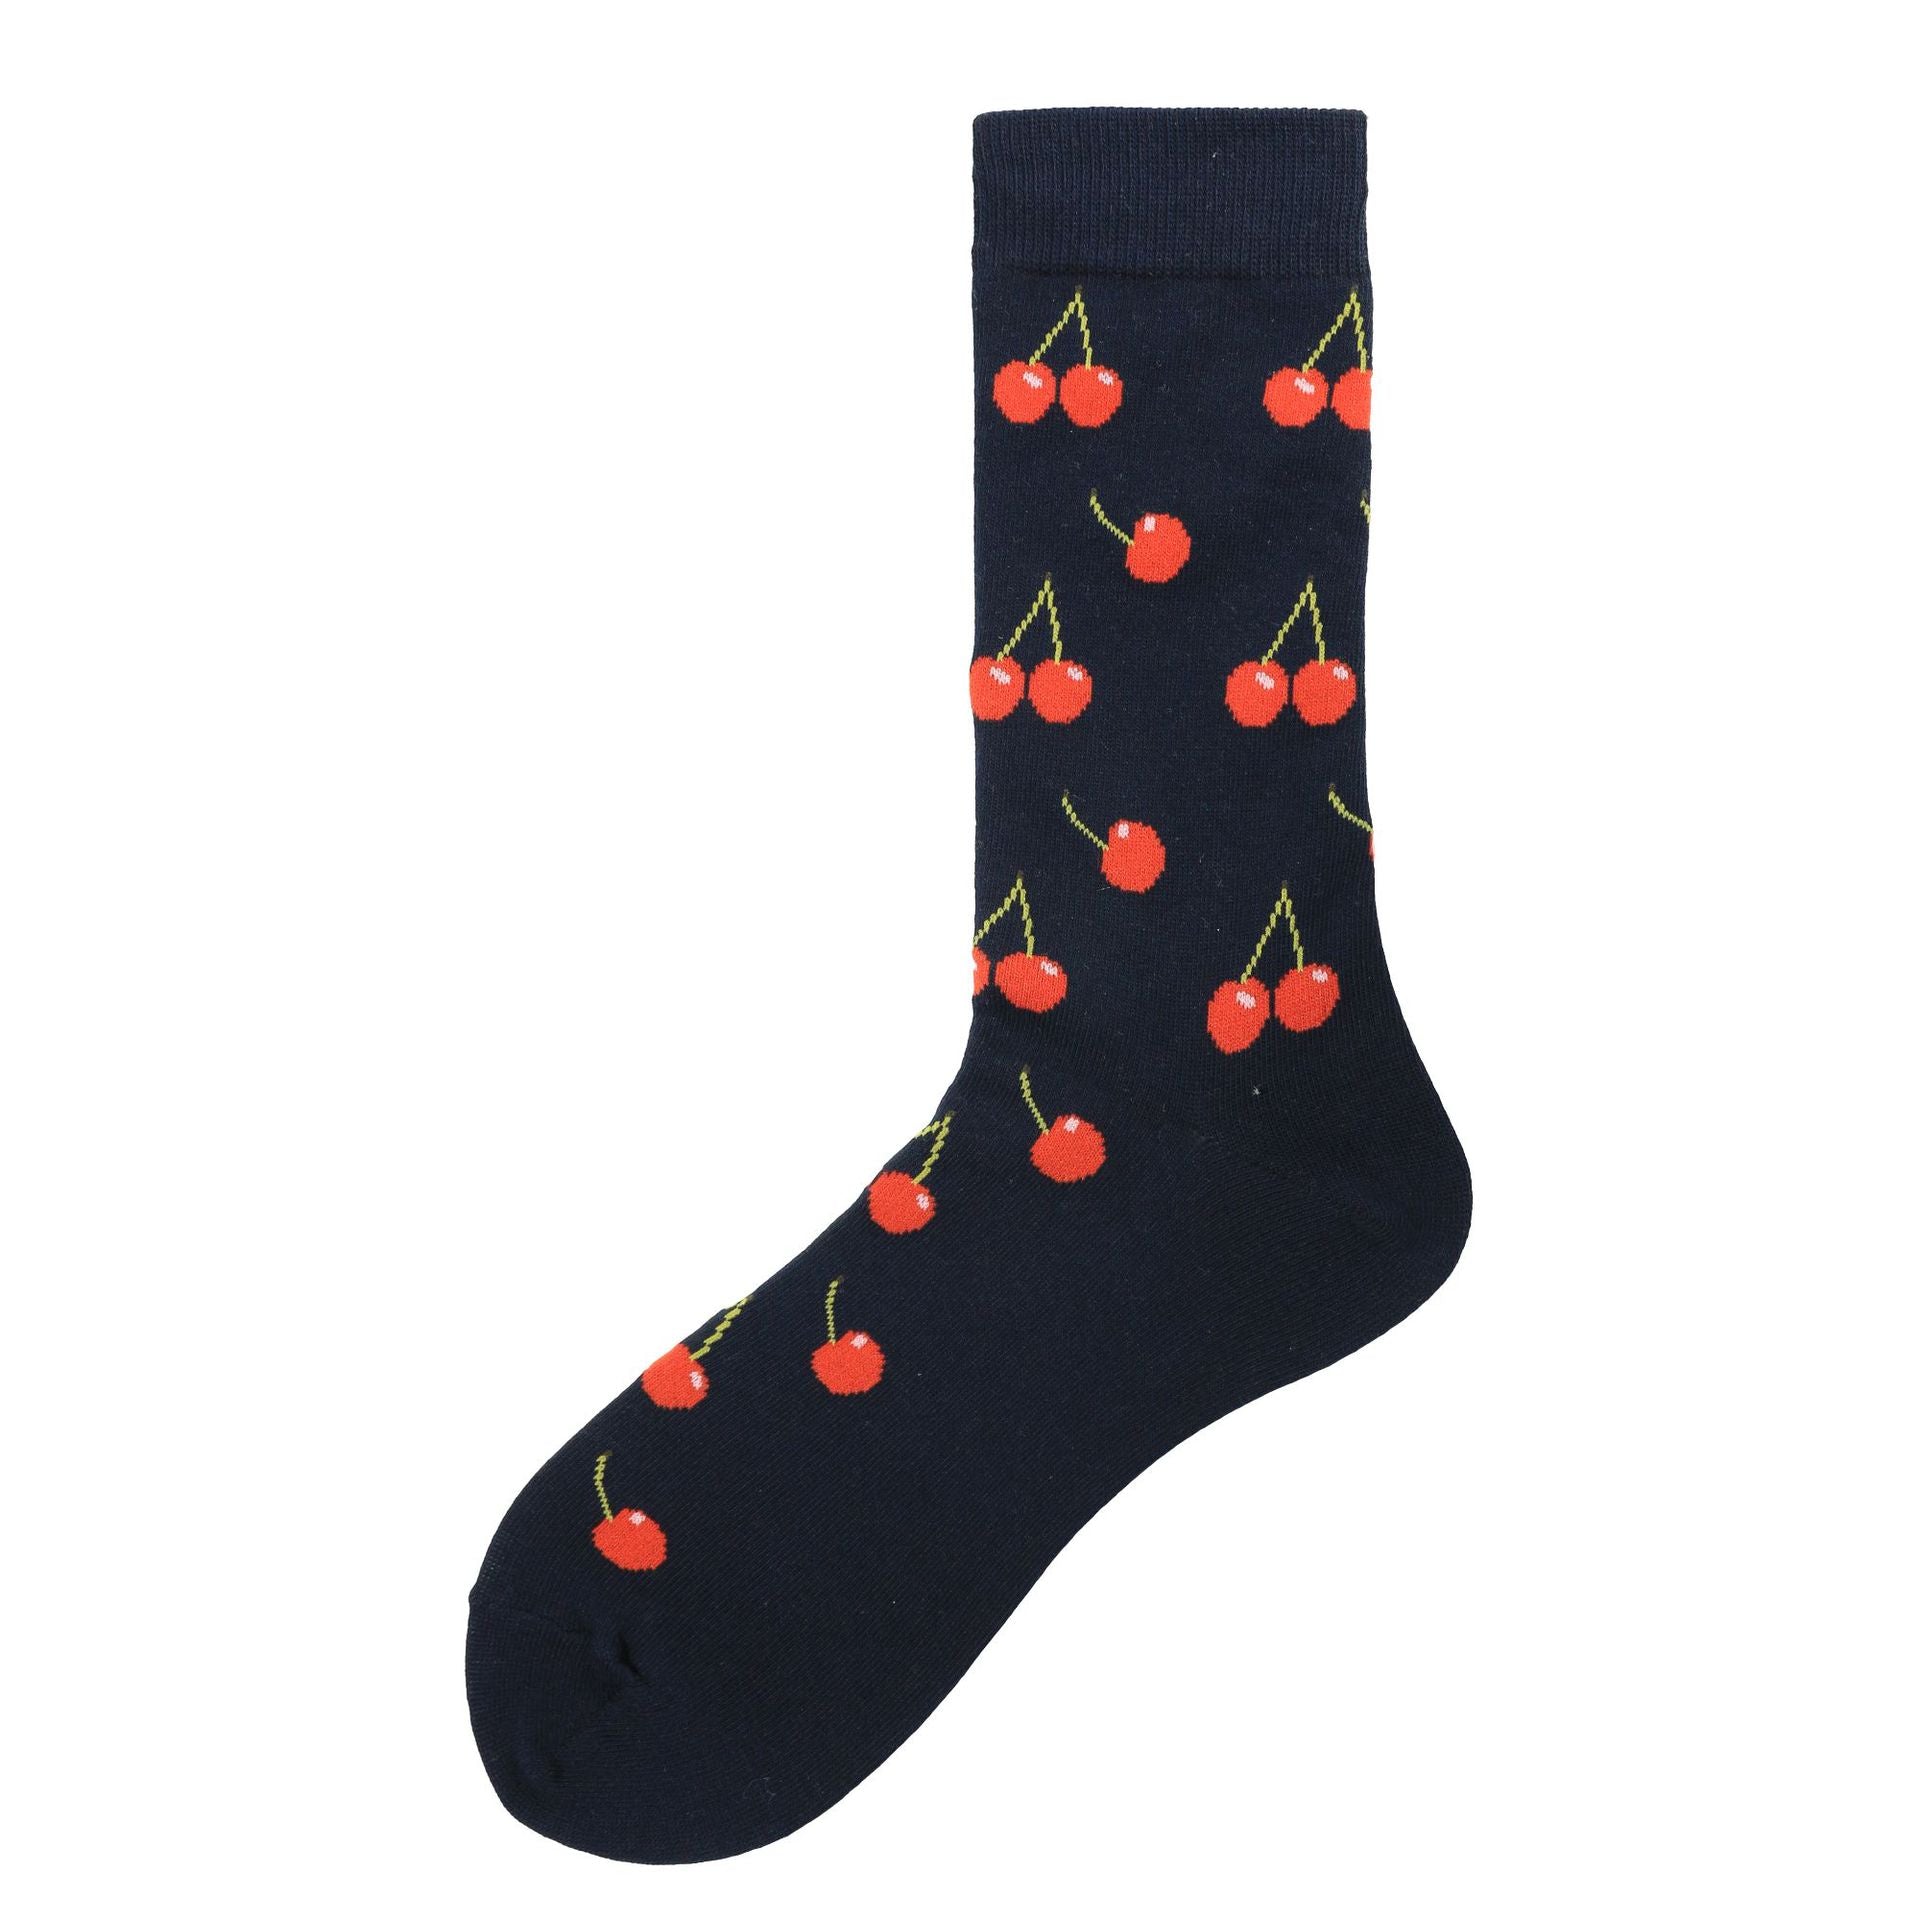 Gourmet Hot Pot Series Colored Casual Cotton Socks